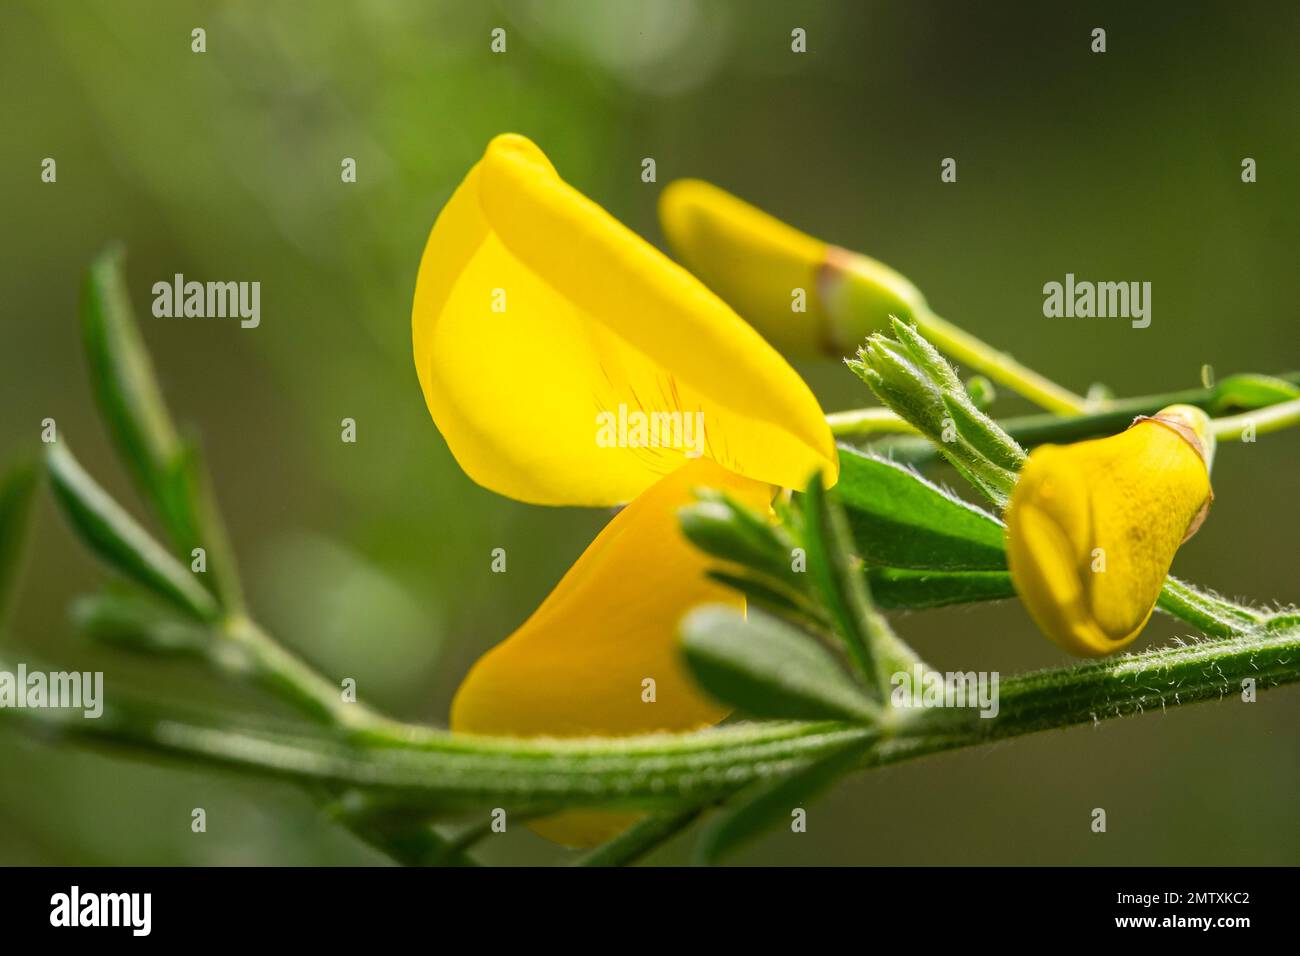 Close up yellow flowers of Cytisus scoparius,syn. Sarothamnus scoparius, common broom or Scotch broom. Family Fabaceae, Spring, Netherlands Stock Photo